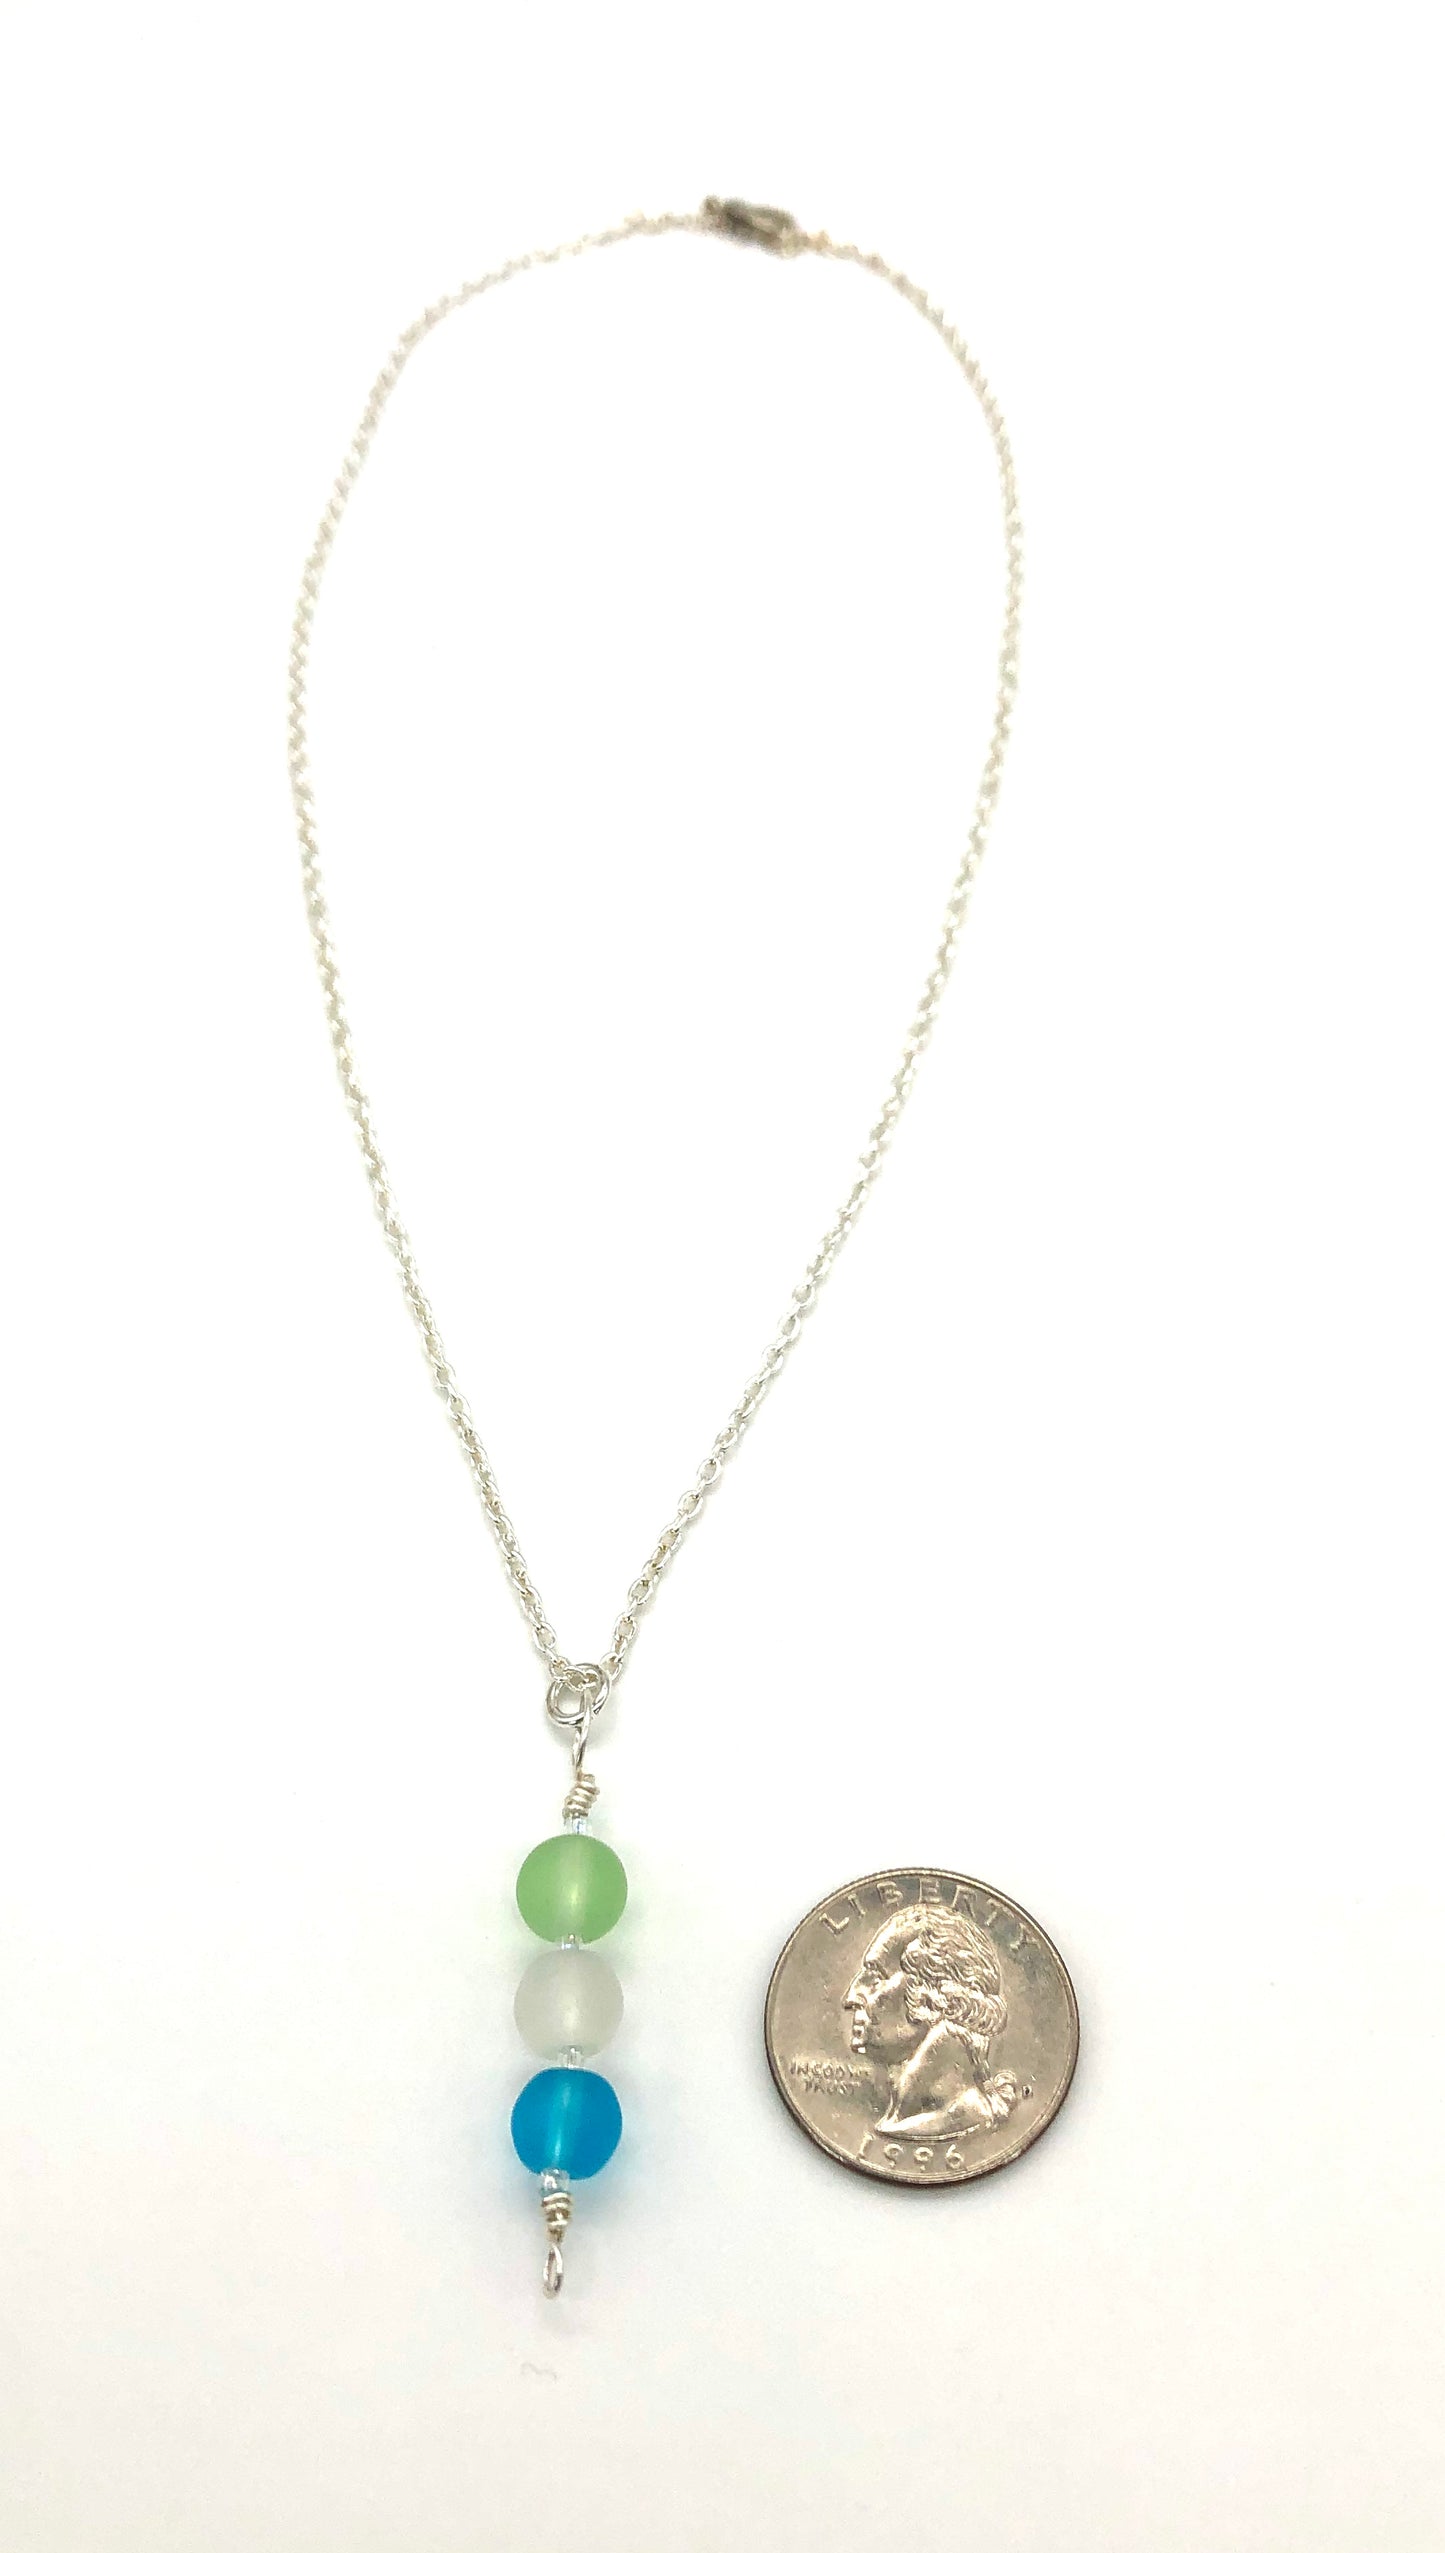 Aqua, light green, white frosted round glass bead pin pendant silver chain necklace